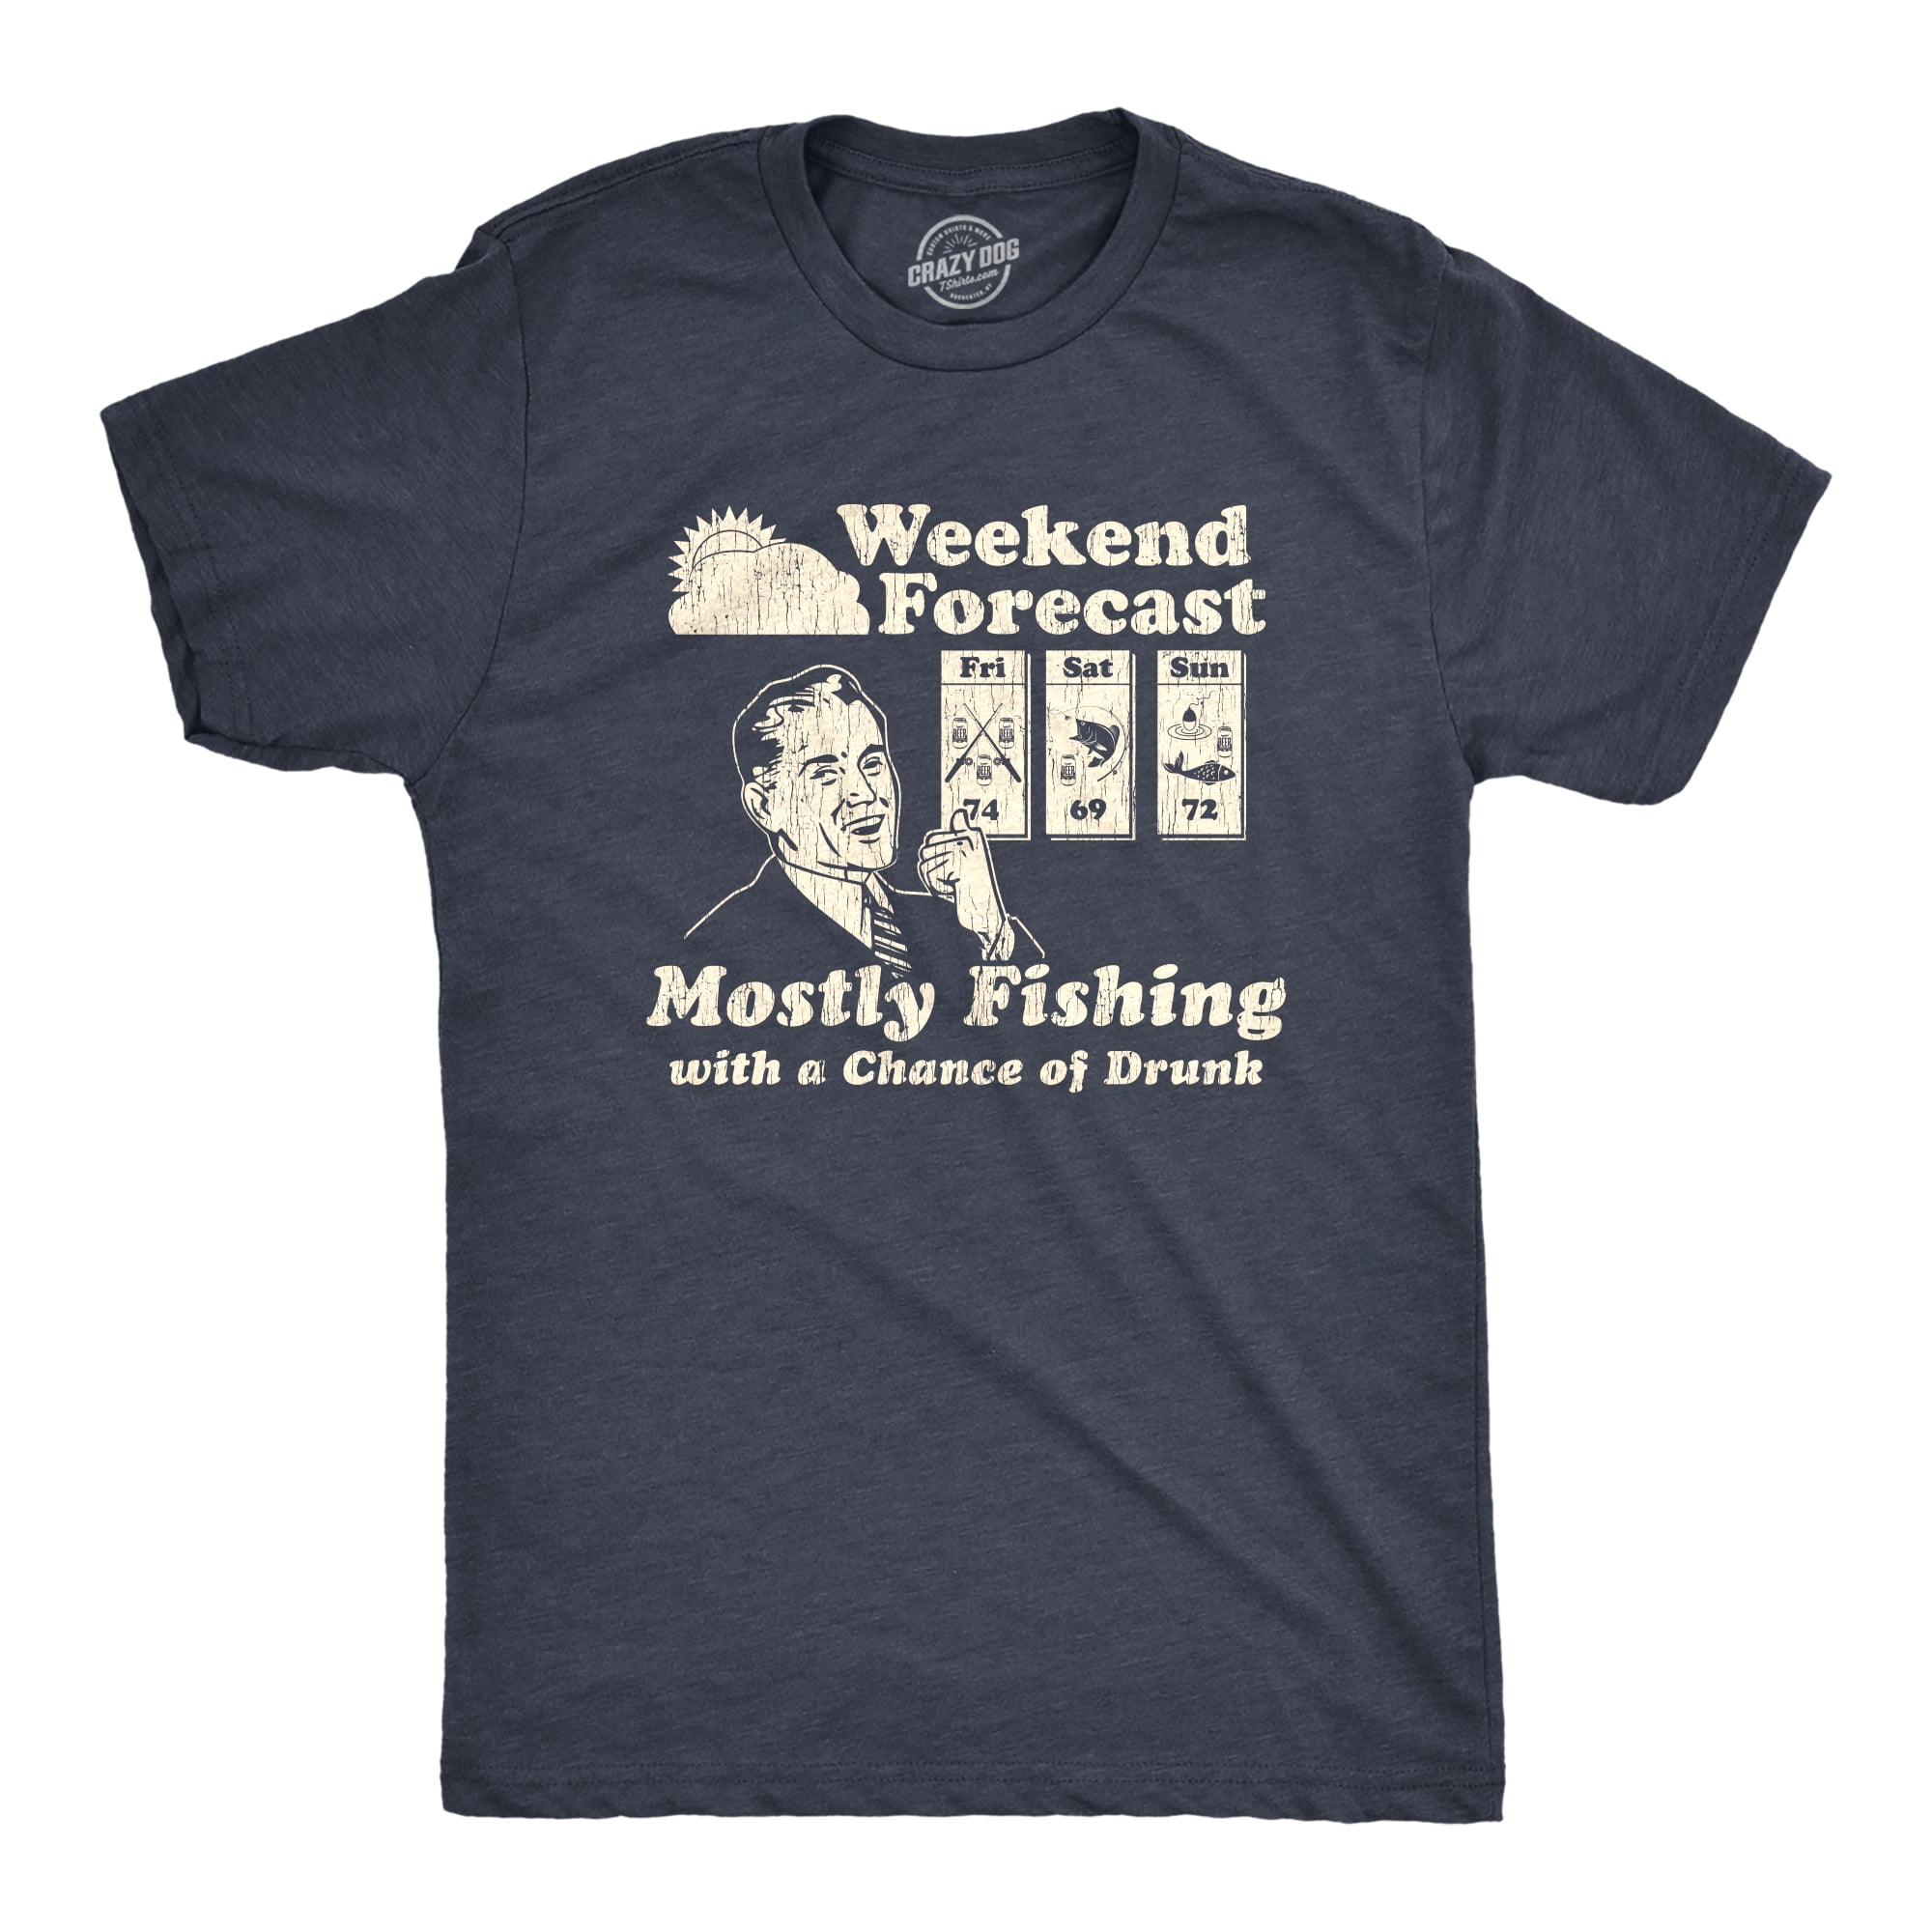 Mens Weekend Forecast Mostly Fishing With A Chance Of Drunk Tshirt Funny  Outdoor Summer Tee Graphic Tees 